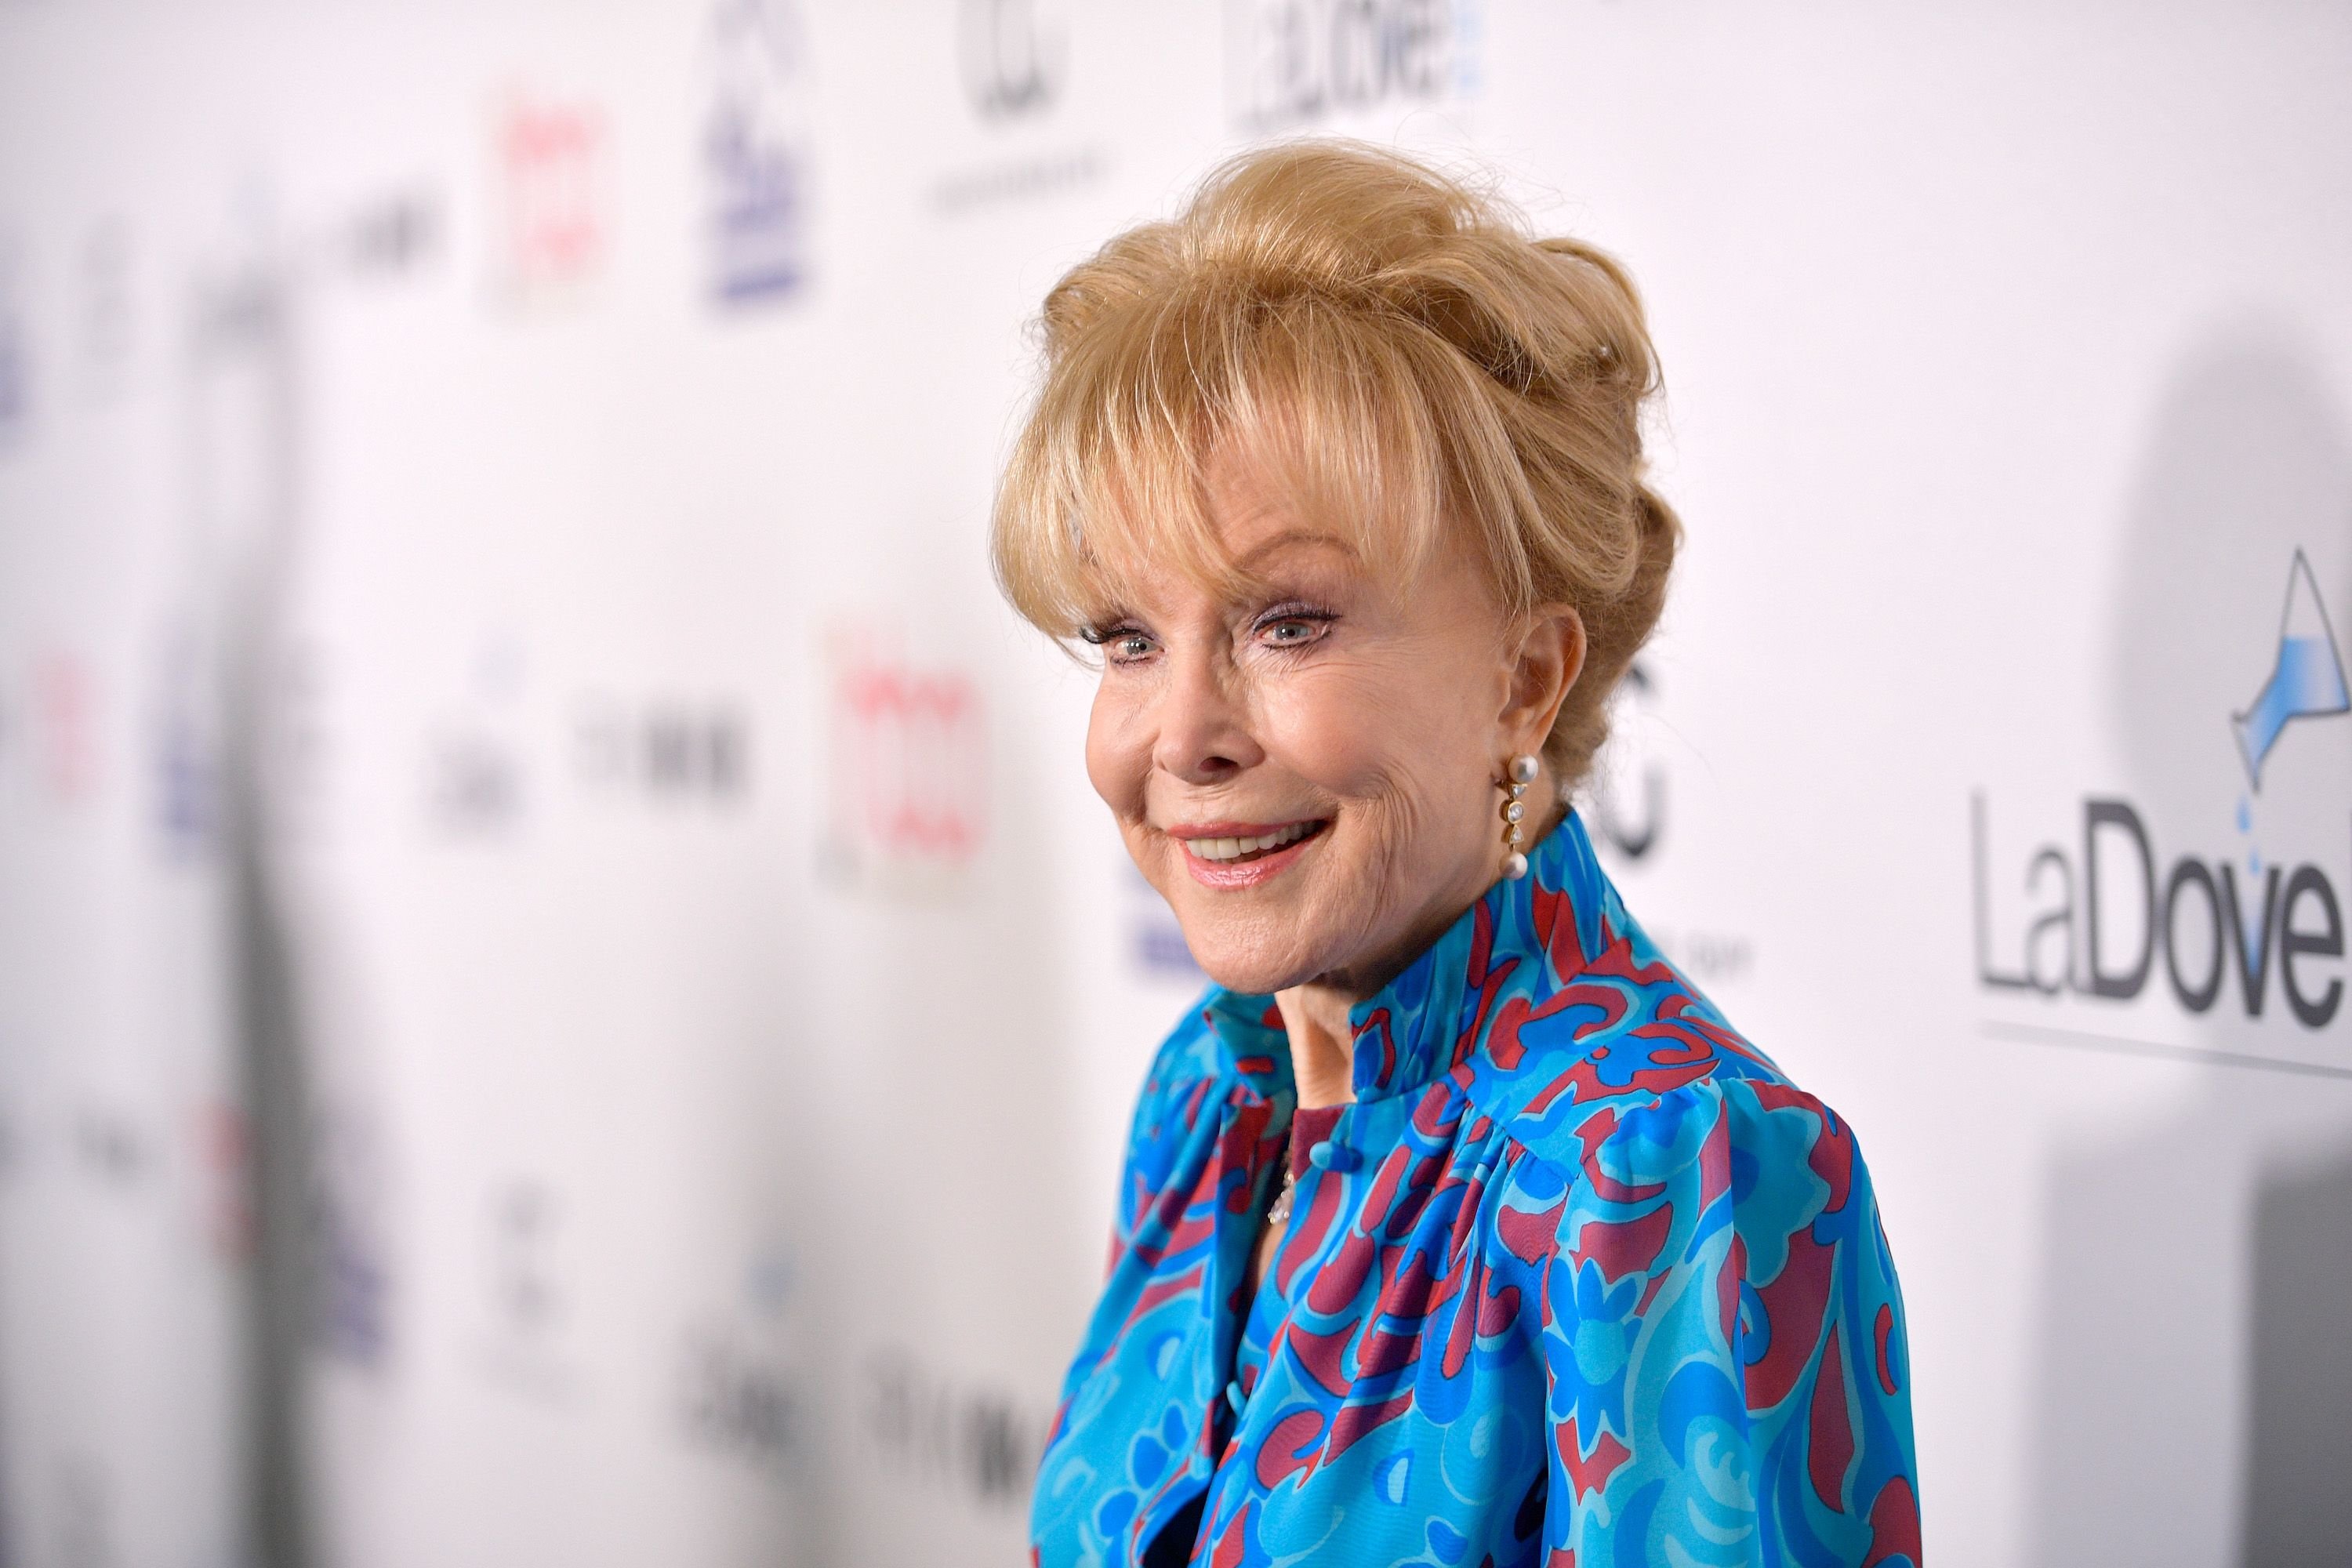 Barbara Eden during the 4th Hollywood Beauty Awards at Avalon Hollywood on February 25, 2018 in Los Angeles, California. | Source: Getty Images